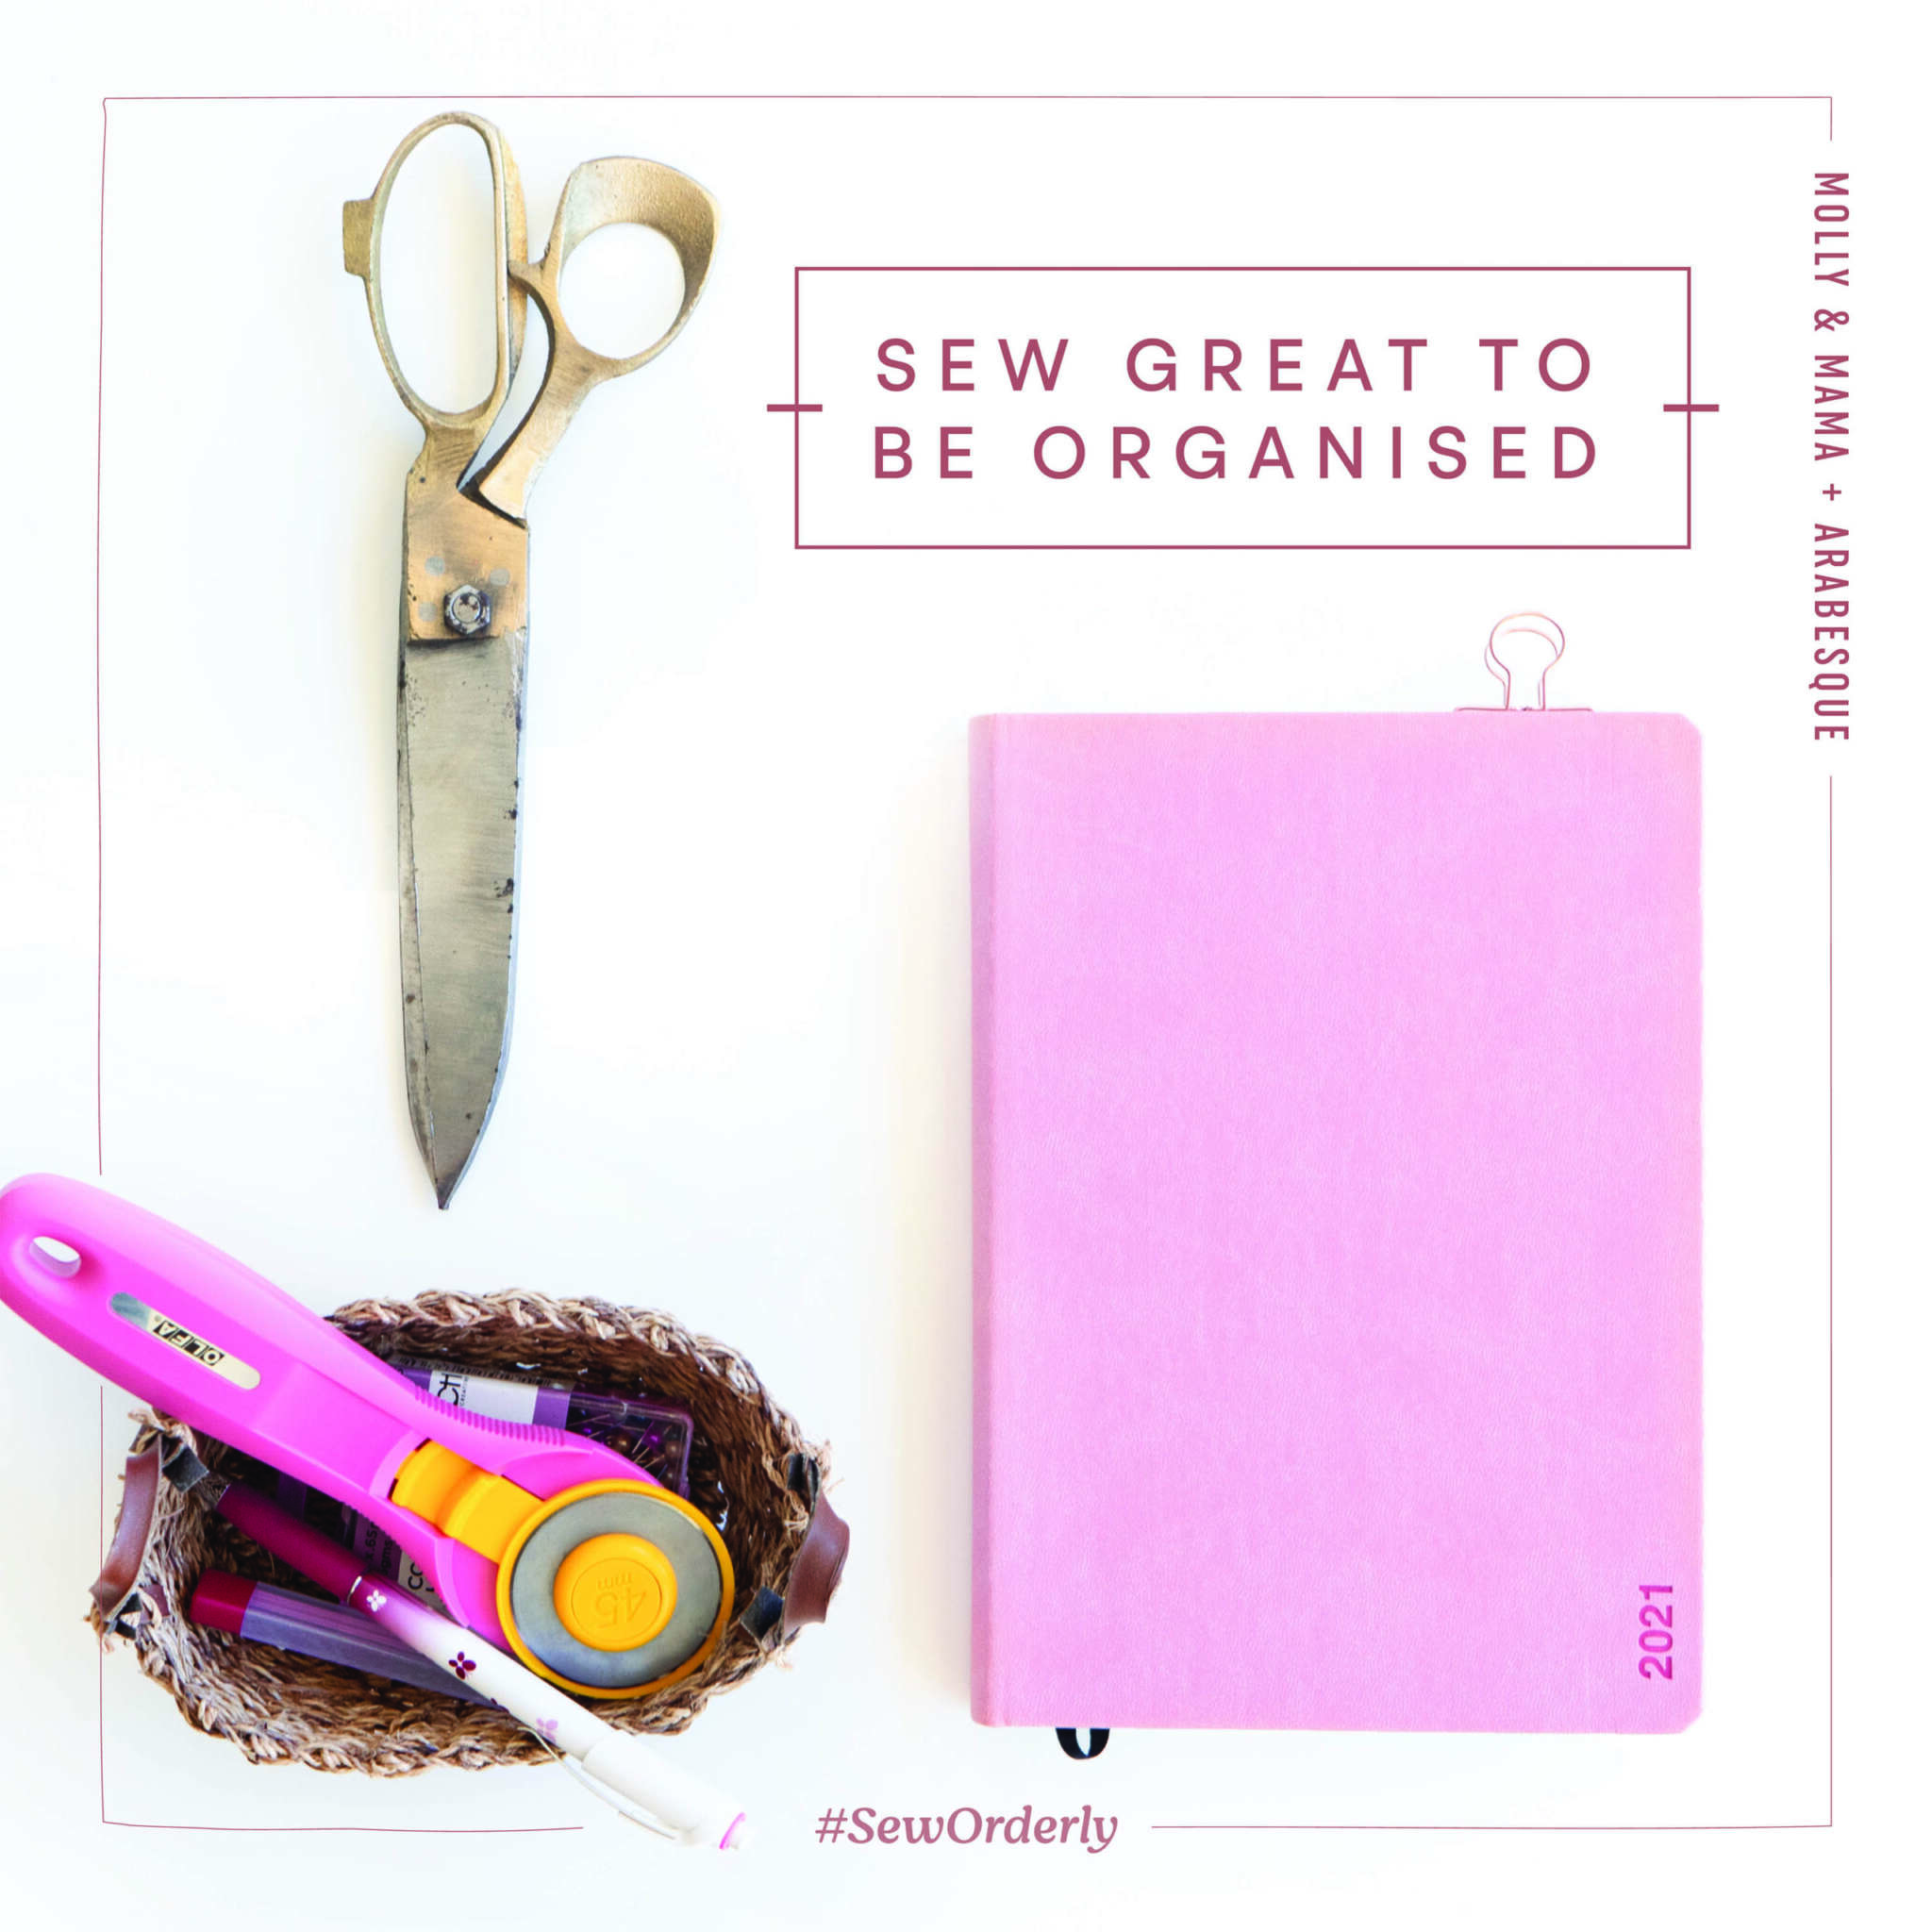 Sew Great To Be Organised –  Instagram Challenge